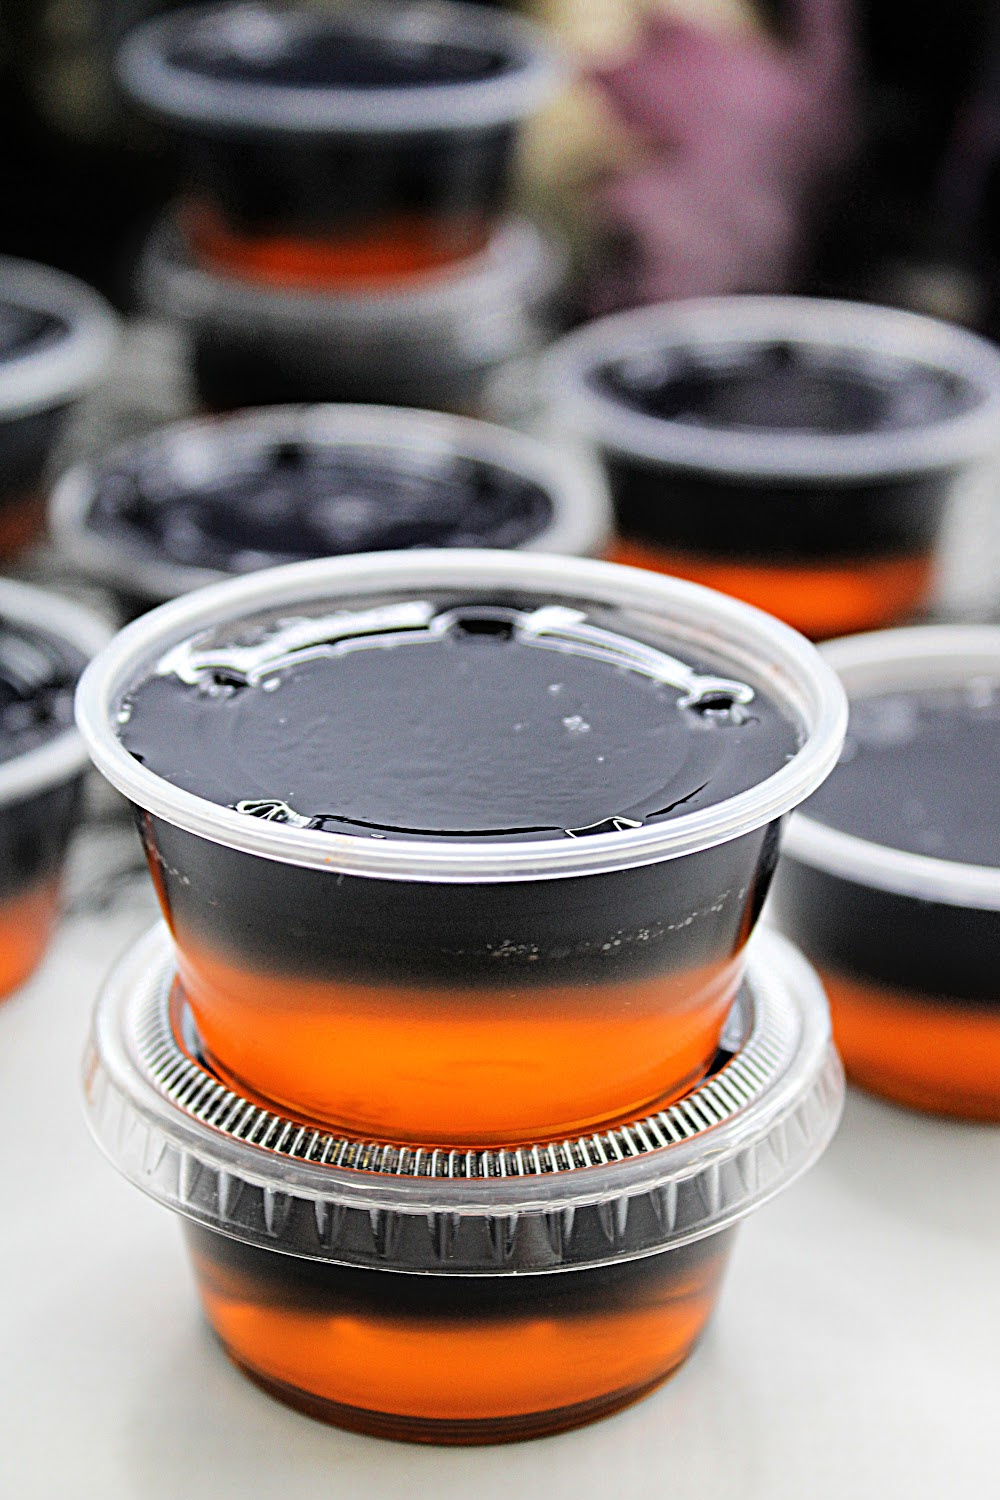 These orange and black layered Halloween jello shots are made with black vodka. The orange jello layer is on the bottom and the black layered made with grape jello and black vodka is on the top. Here they are stacked on top of each other with plenty in the background.